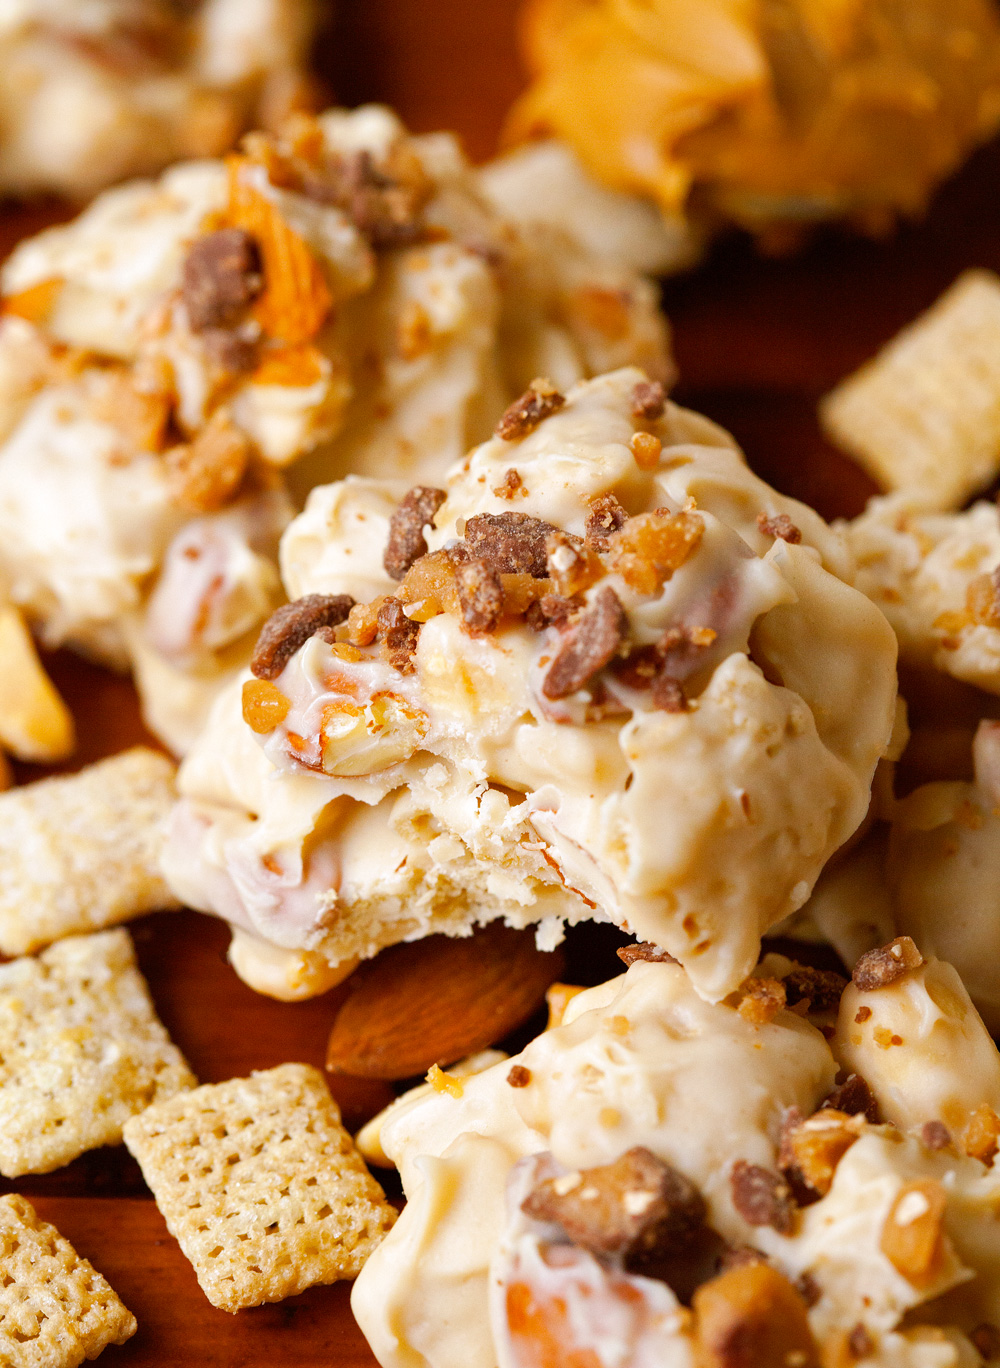 Crunchy White Chocolate and Toffee Clusters